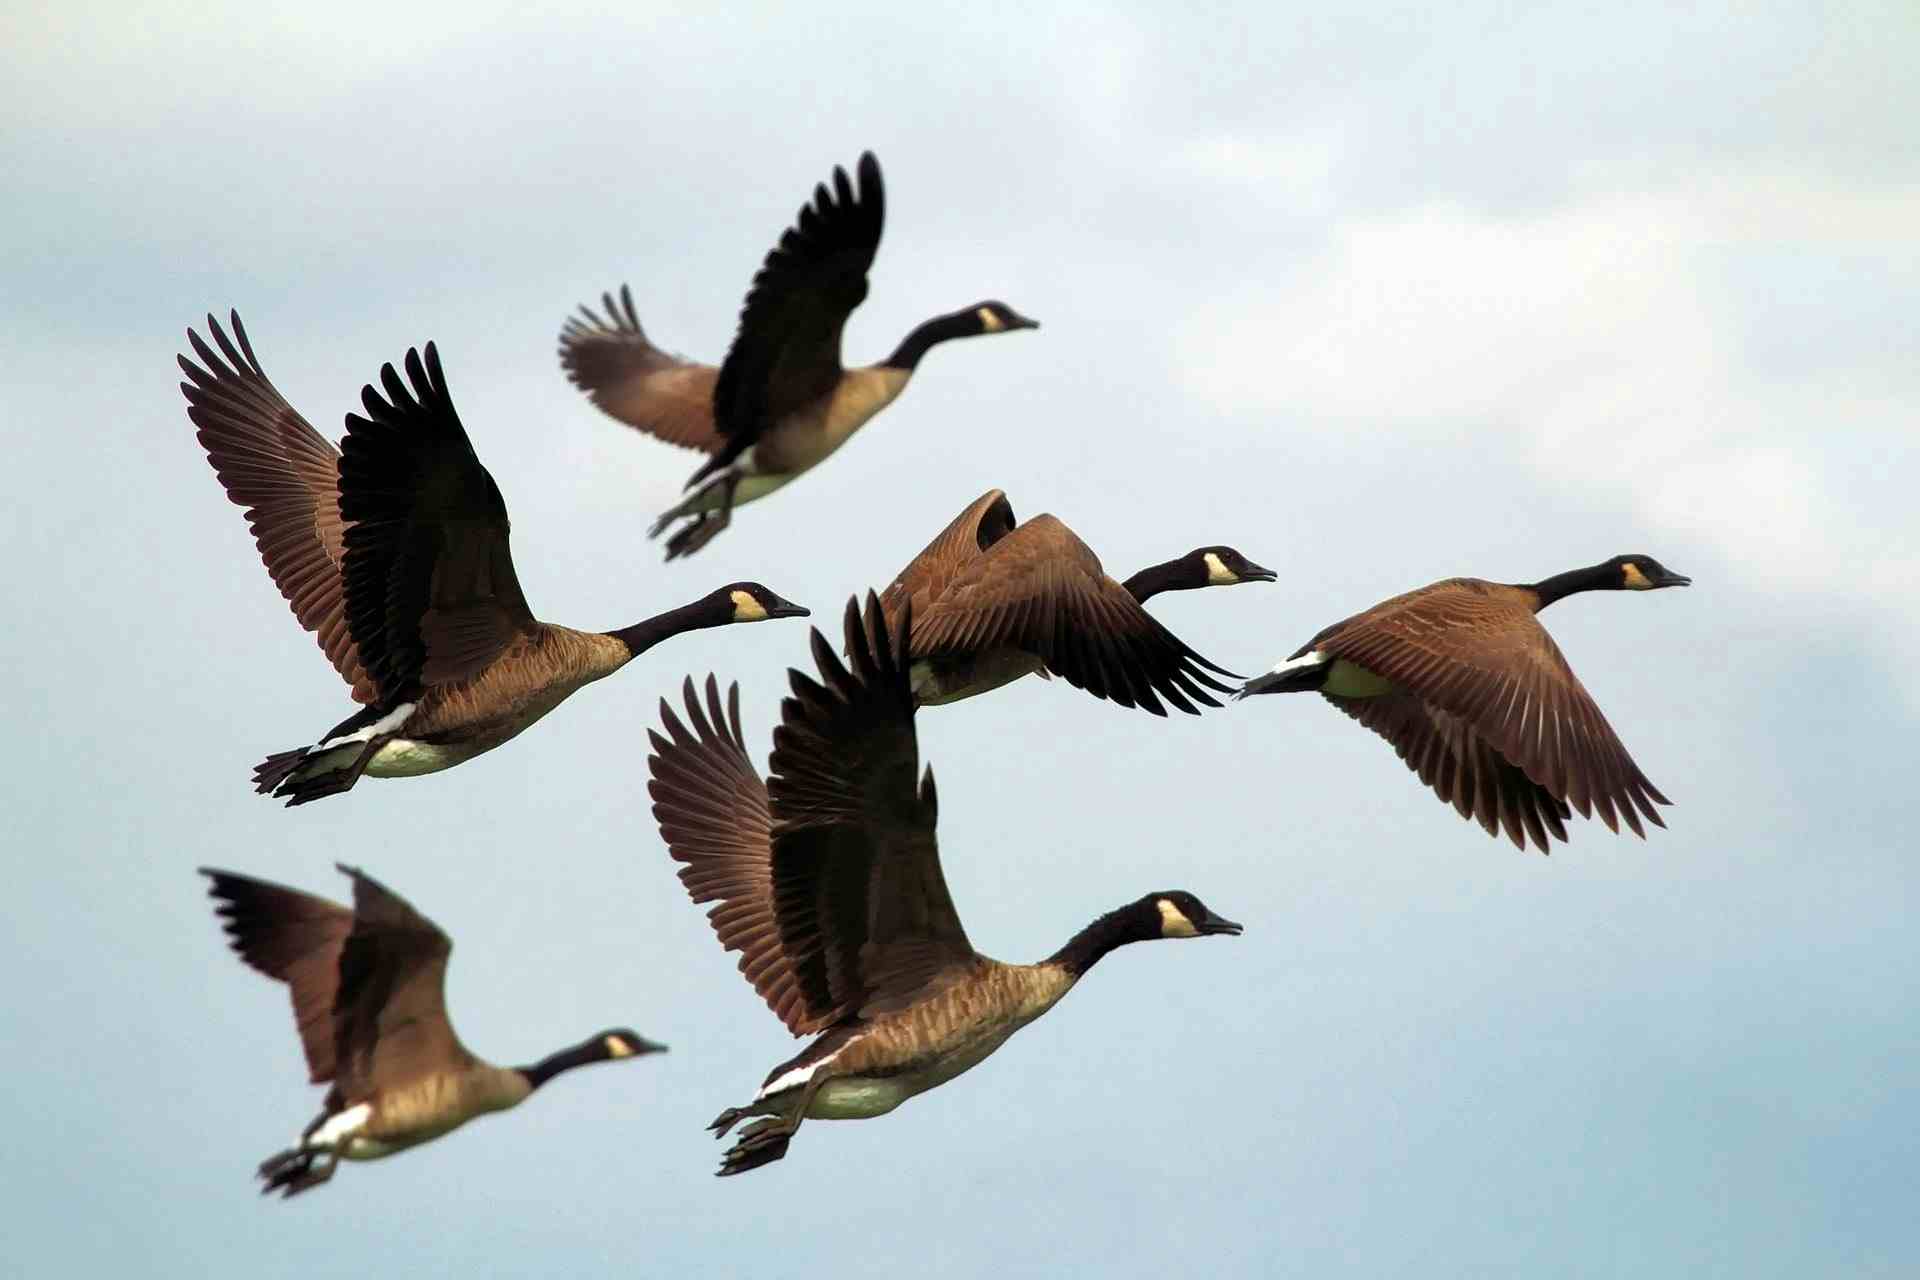 Gees flying - comparing geese to cats - can cats find their way home?